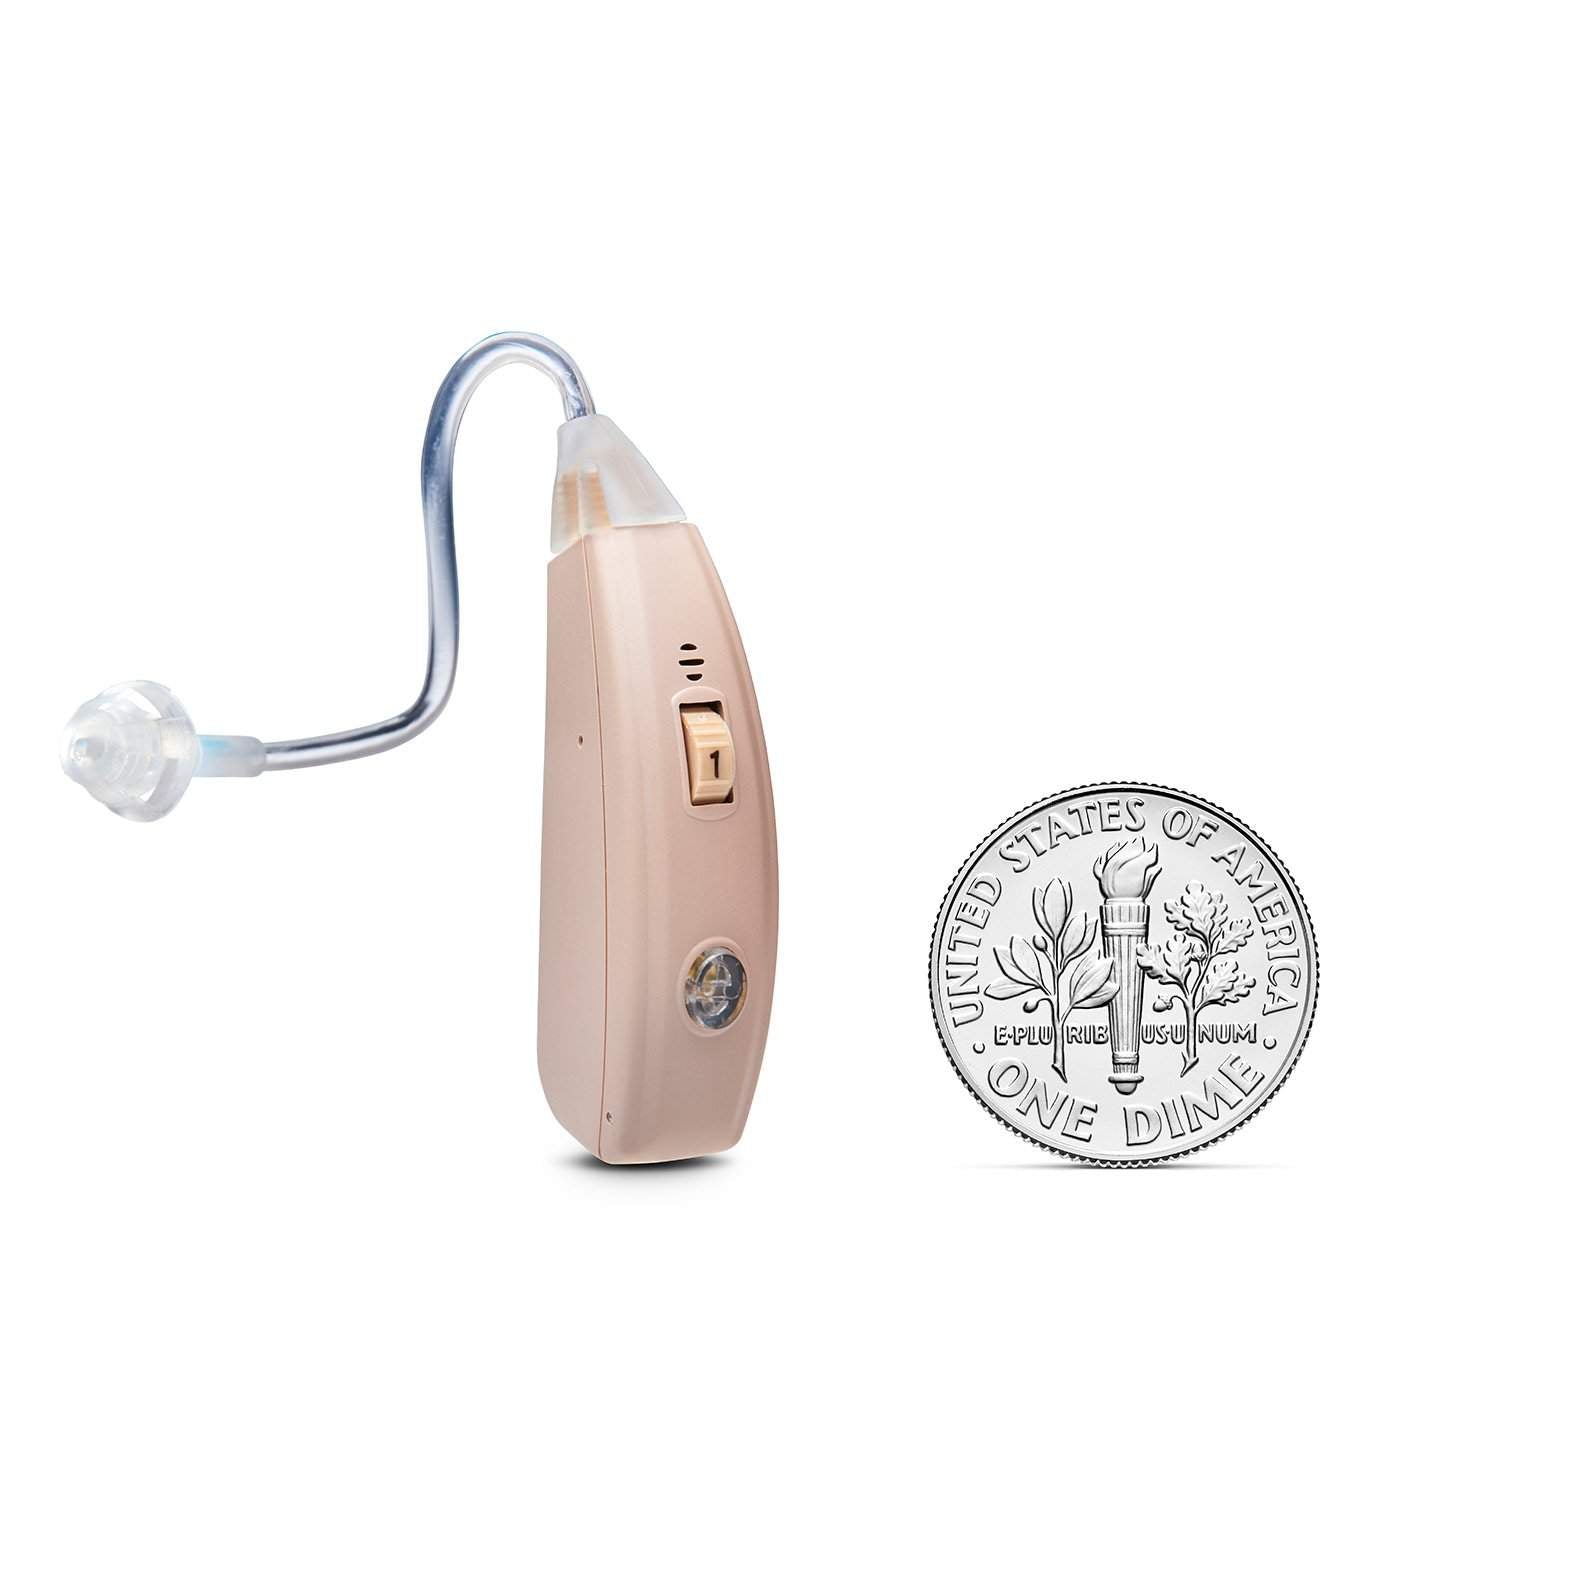 HDR 200 Rechargeable Digital Hearing Aid